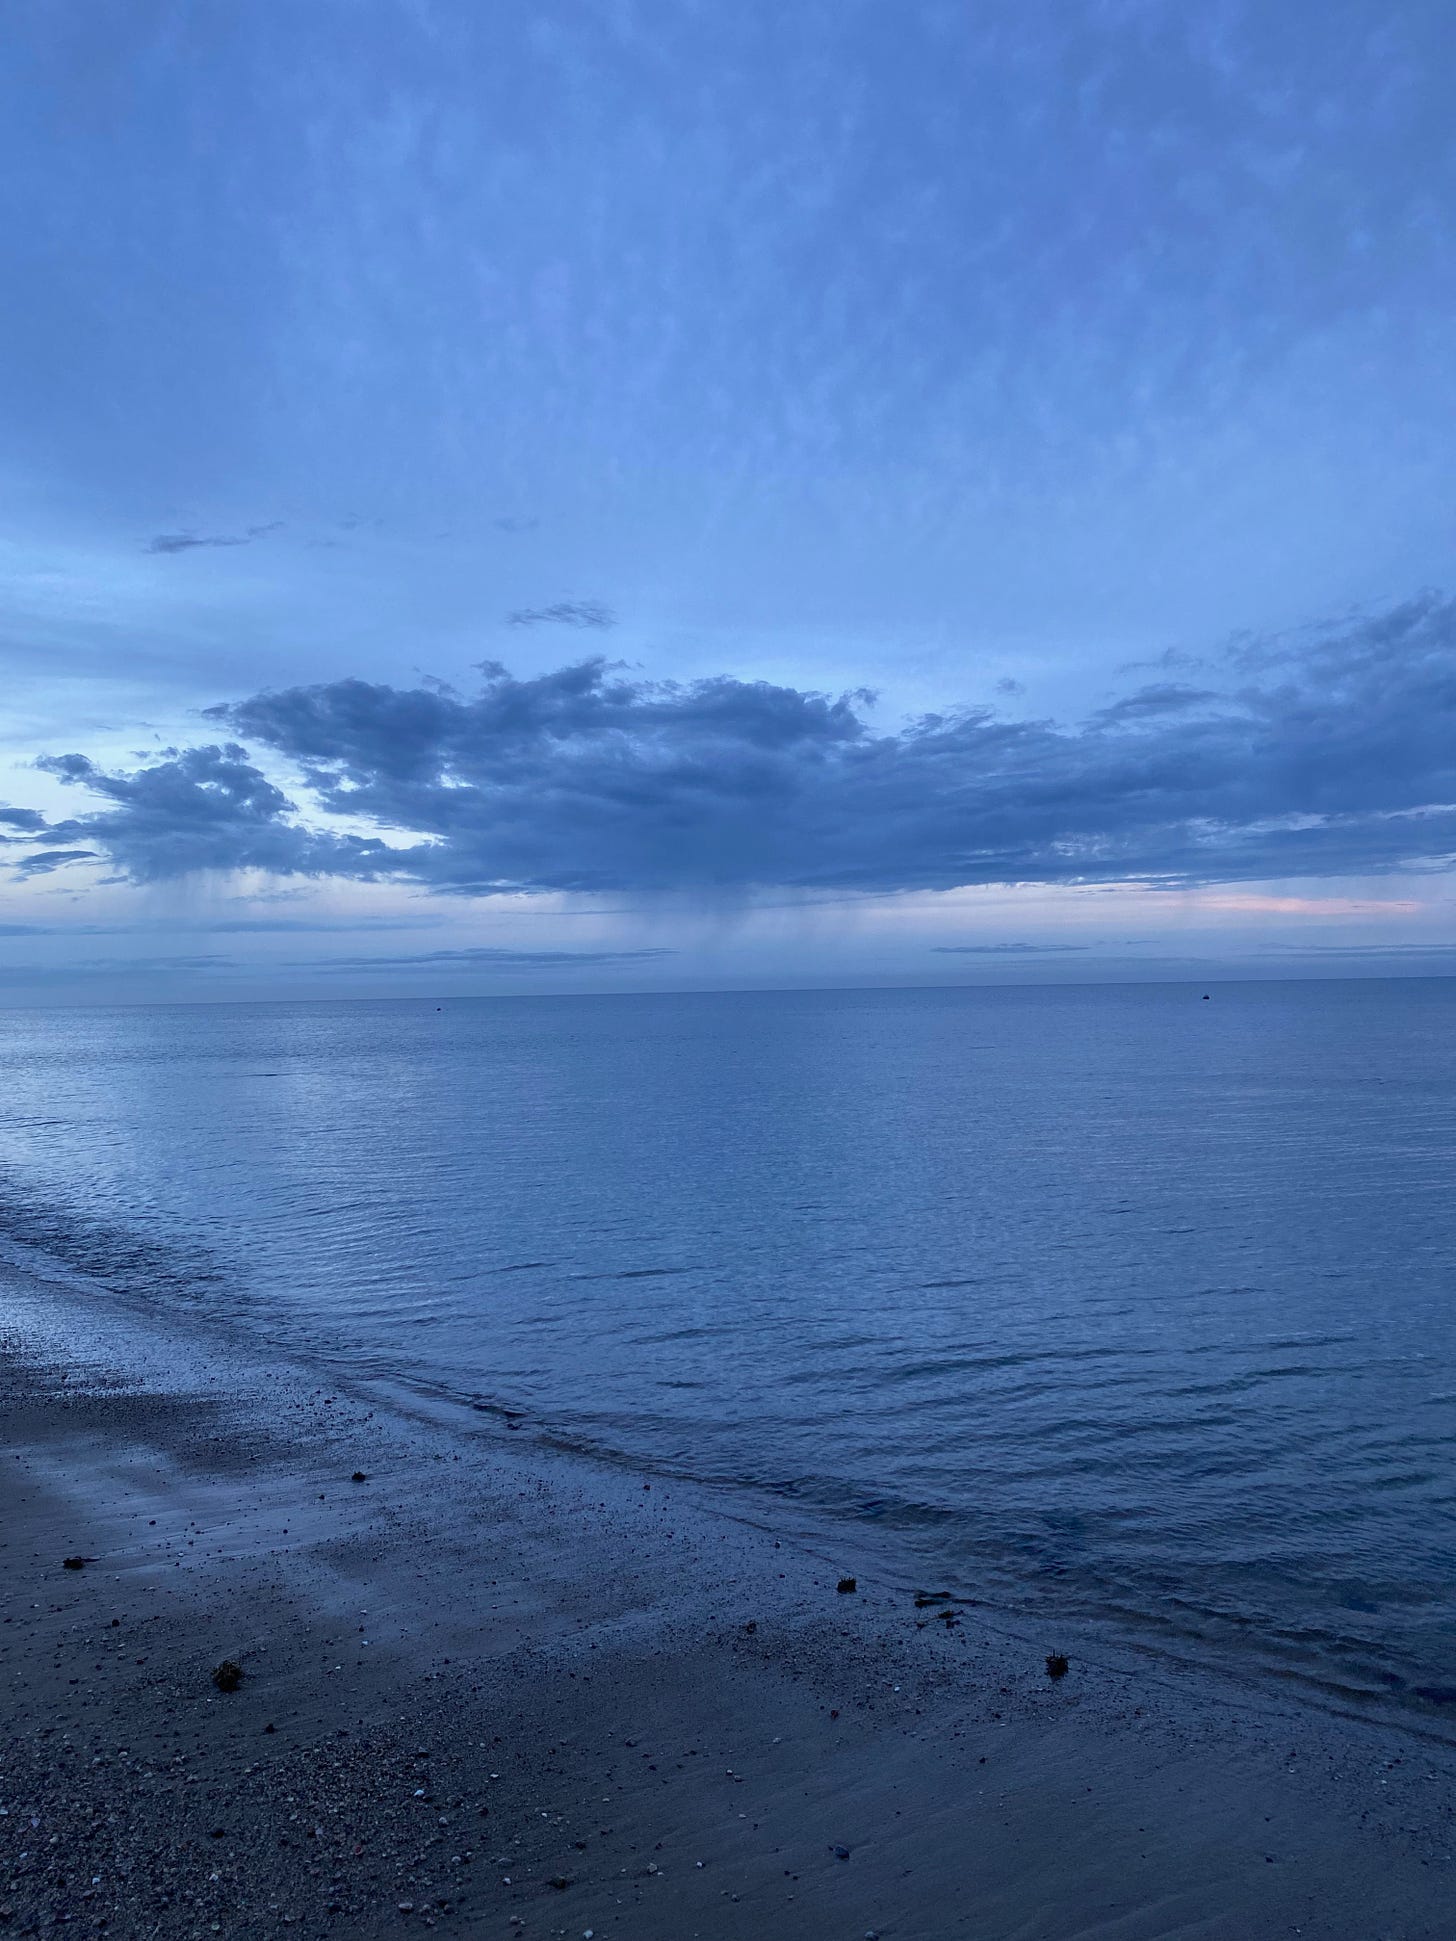 The beach at sunrise. The ocean is still and blue, and the sky is deep blue, with dark clouds, and silver and pink streaks along the horizon.